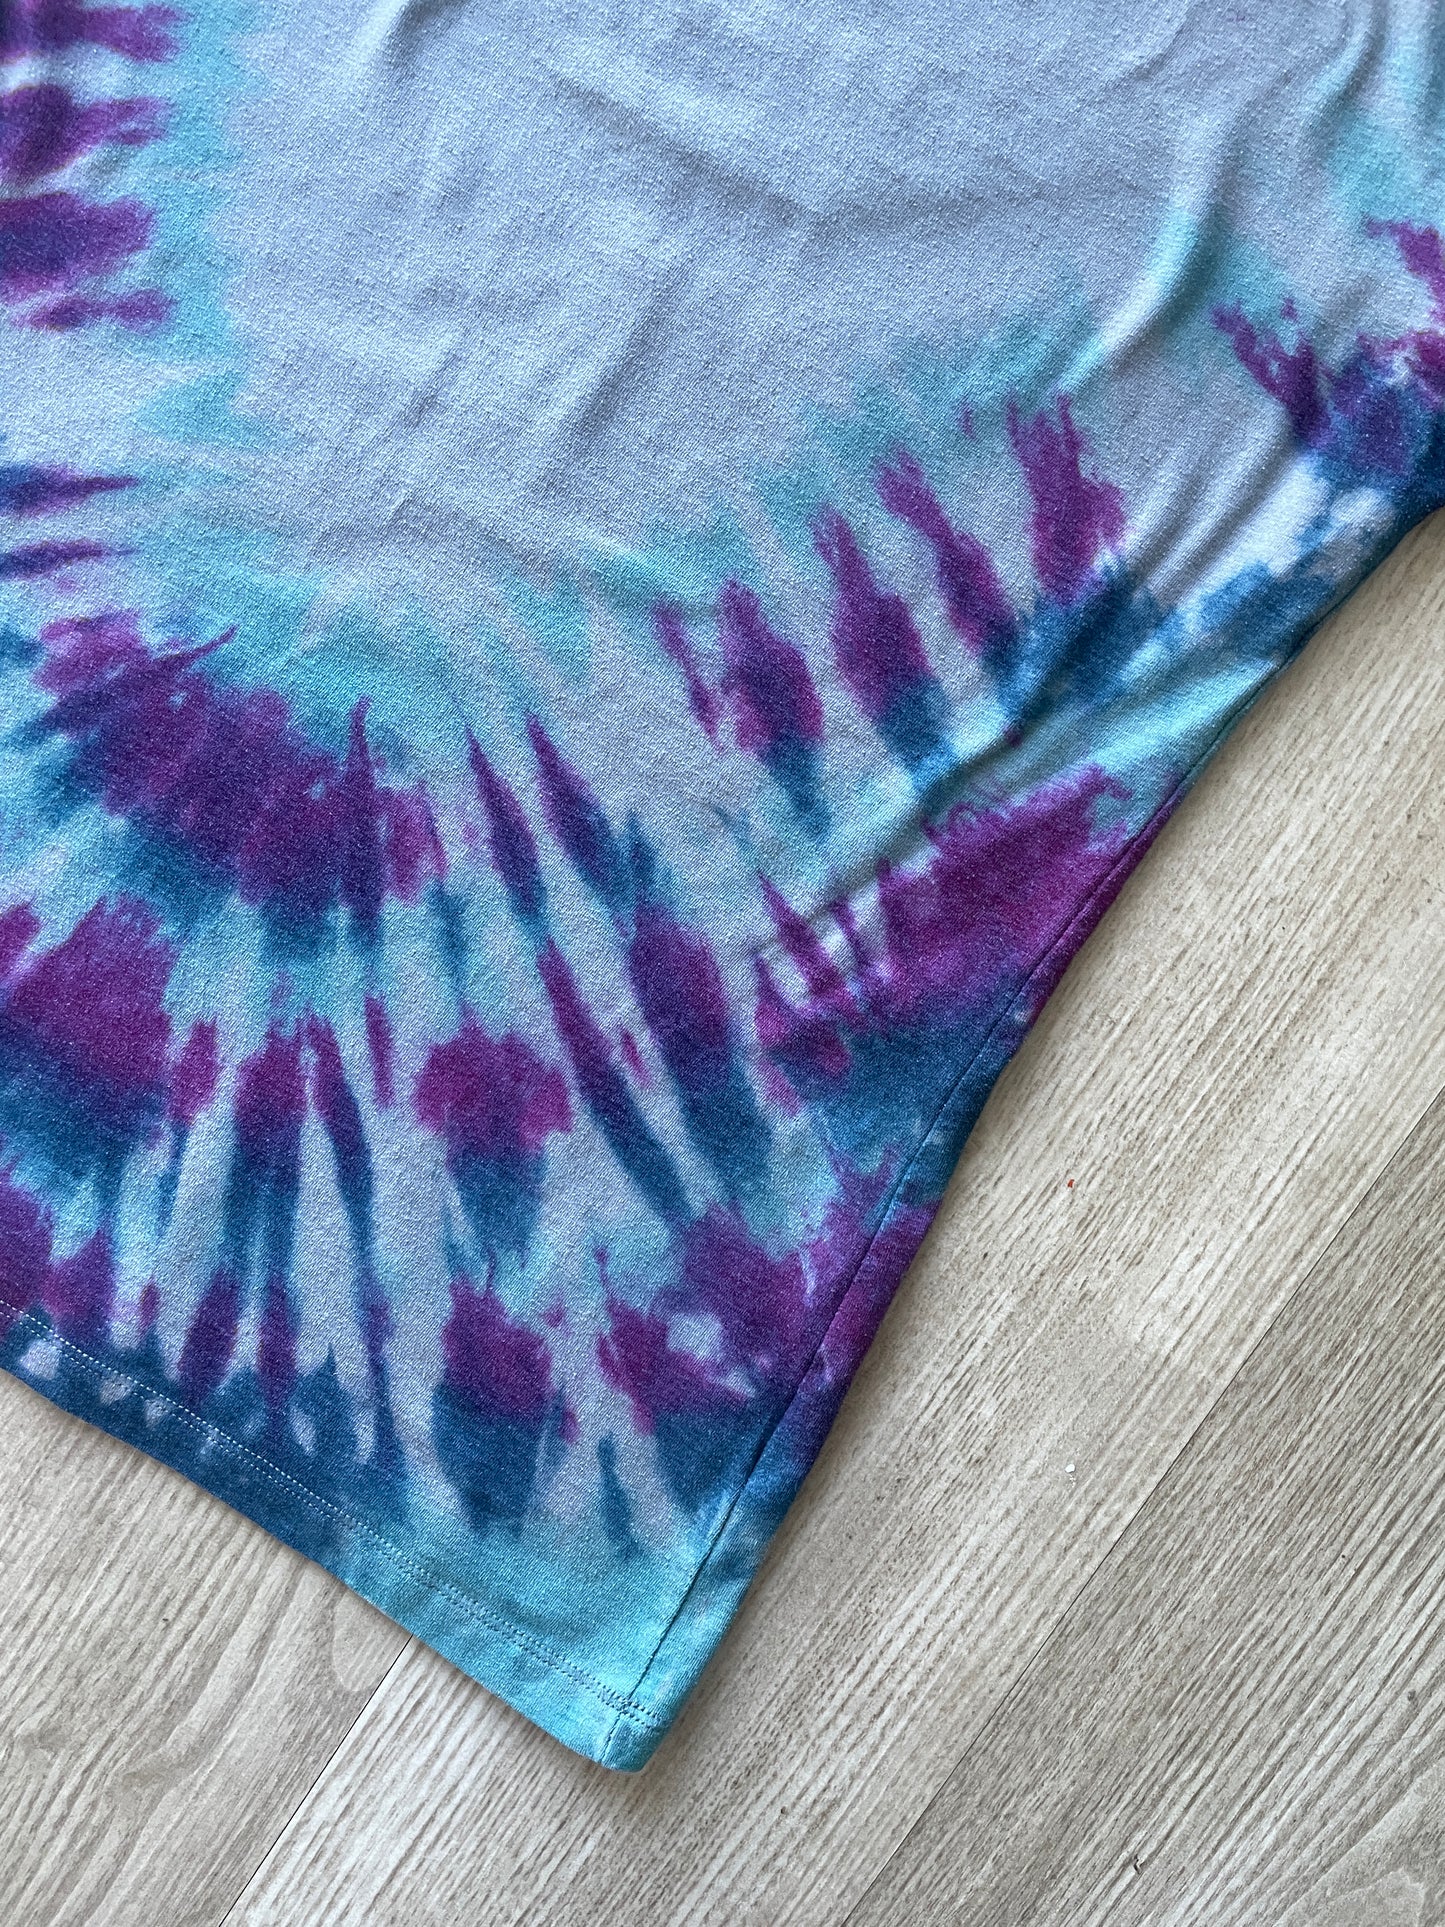 MEDIUM Women's Patagonia Eagle Handmade Tie Dye Short Sleeve V-Neck T-Shirt | One-Of-a-Kind Upcycled Blue and Green Top